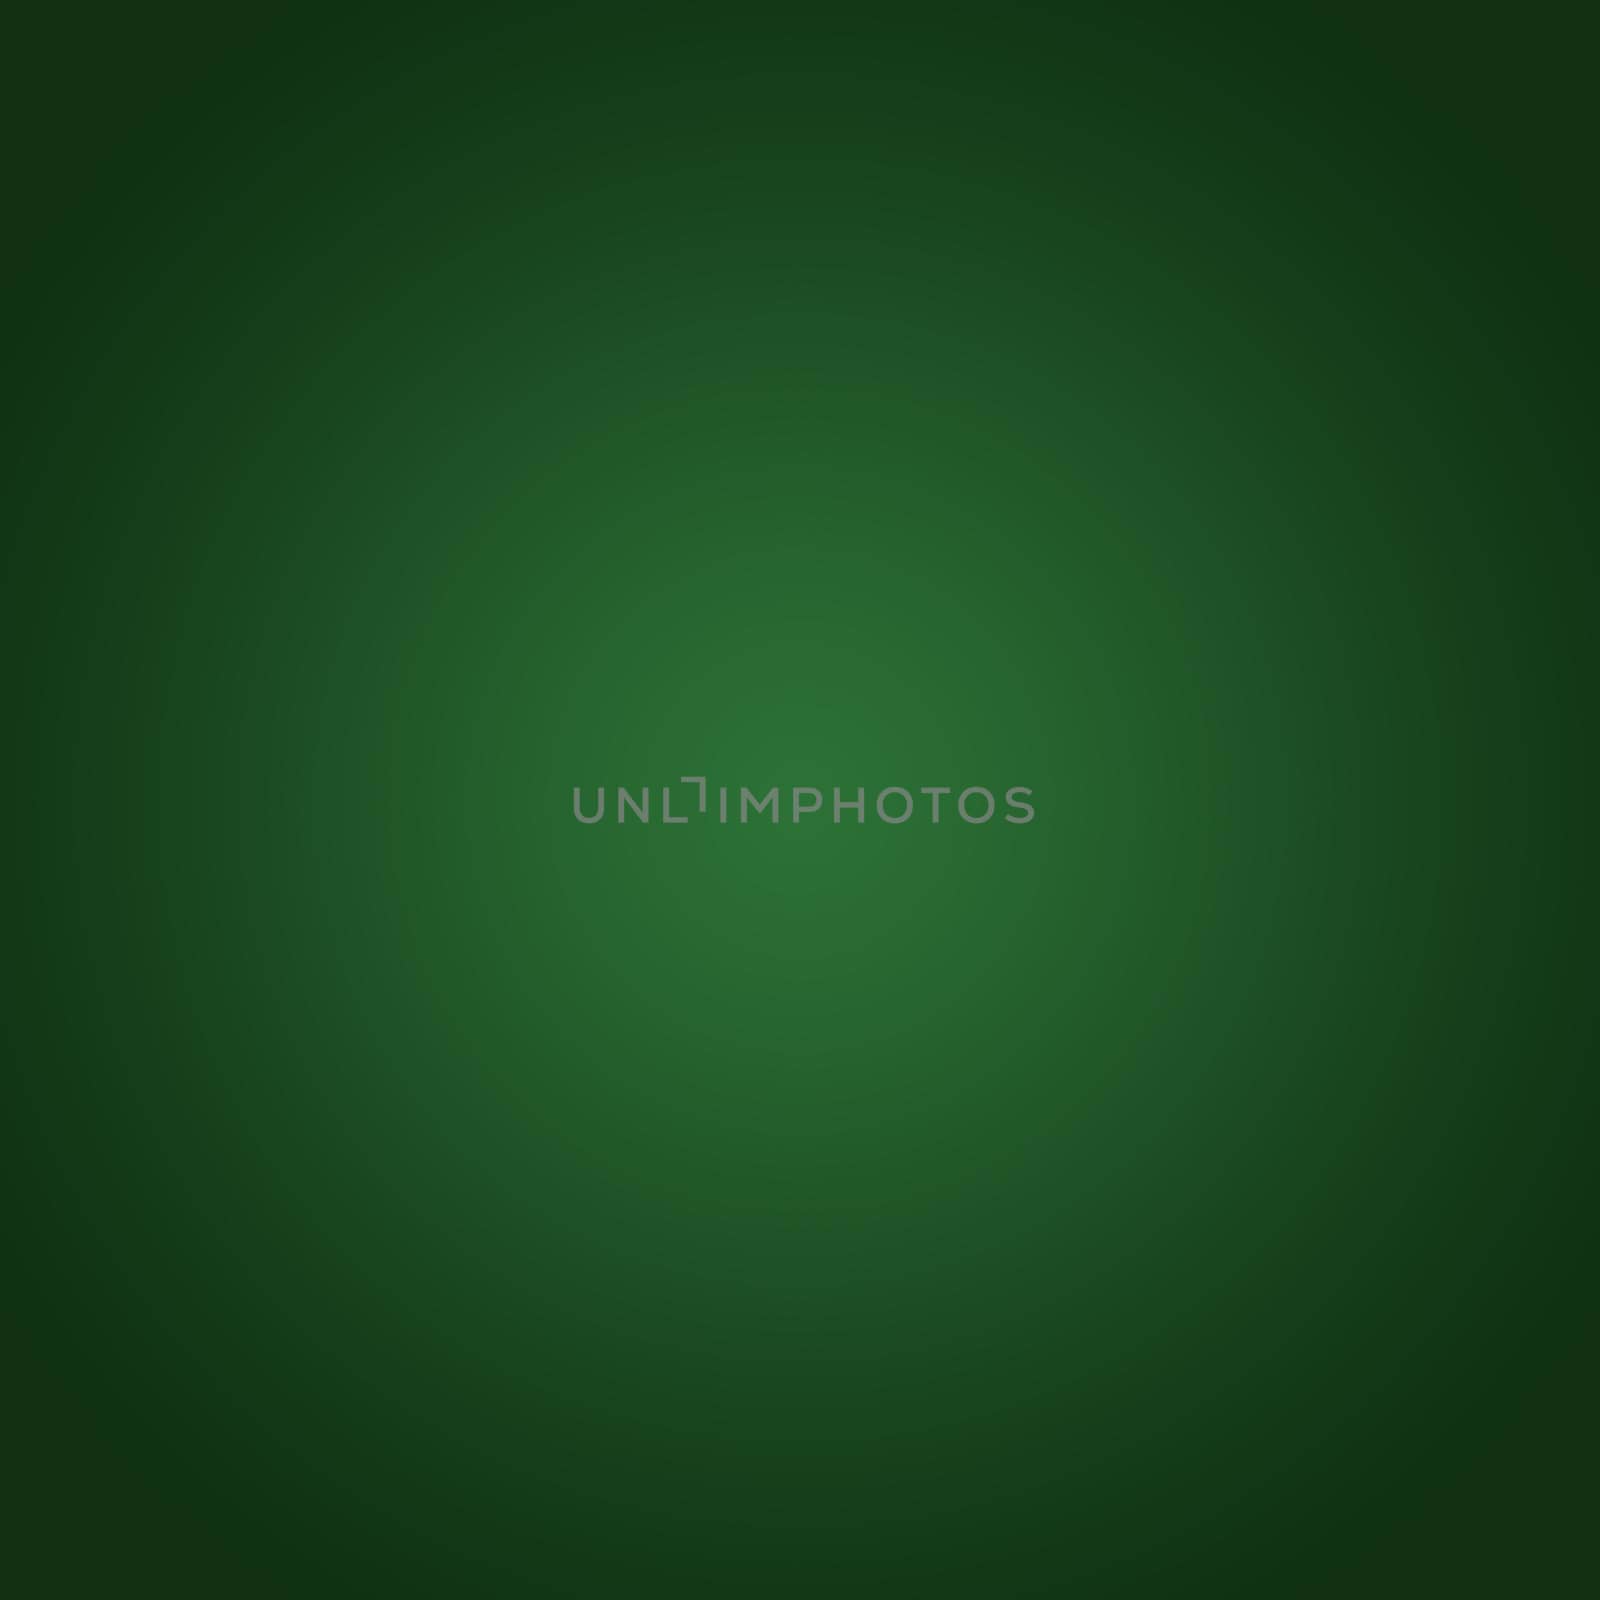 Luxury plain Green gradient abstract studio background empty room with space for your text and picture by Benzoix